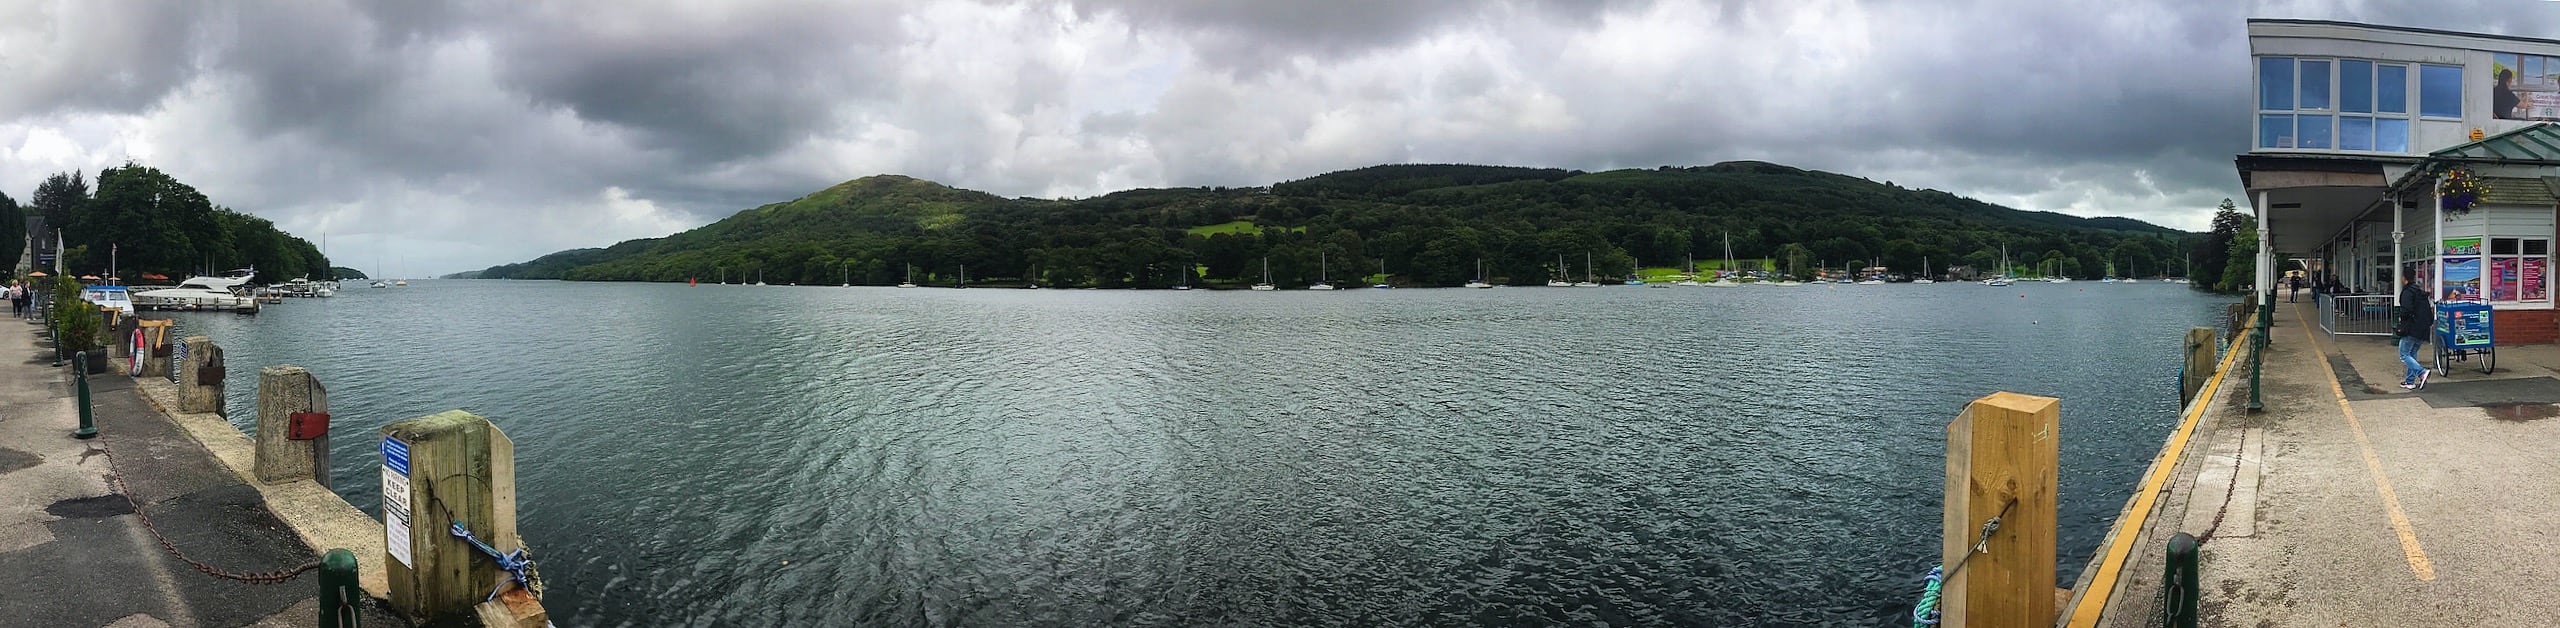 Windermere panorama from Lakeside